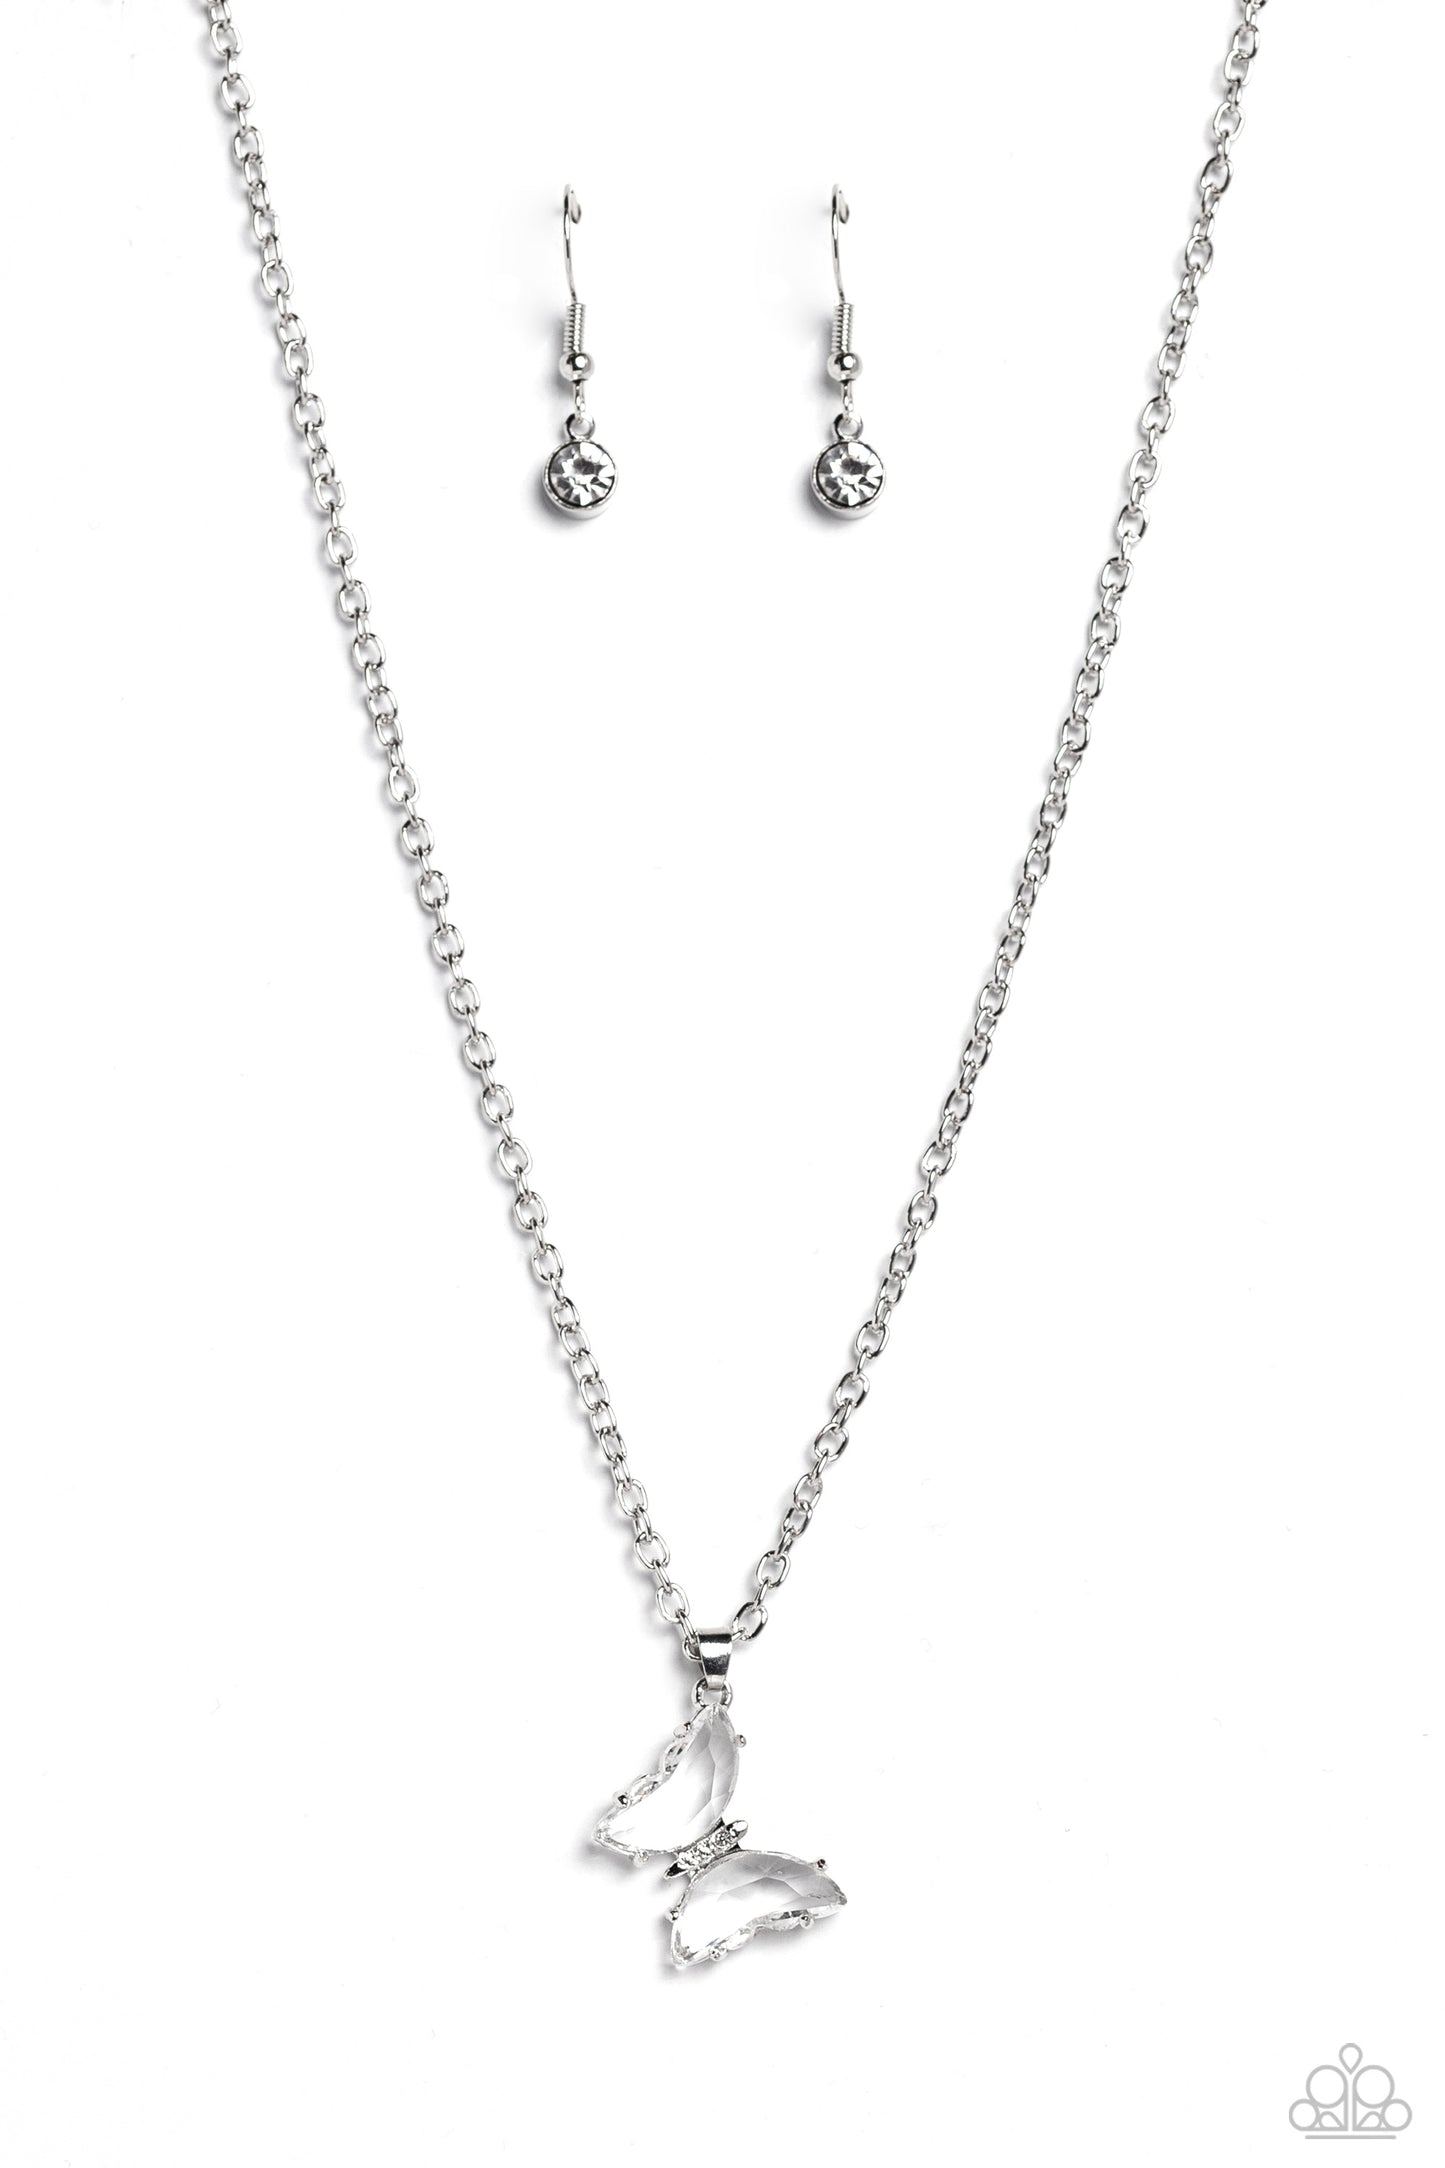 Paparazzi Necklaces - Butterfly Lullaby - White